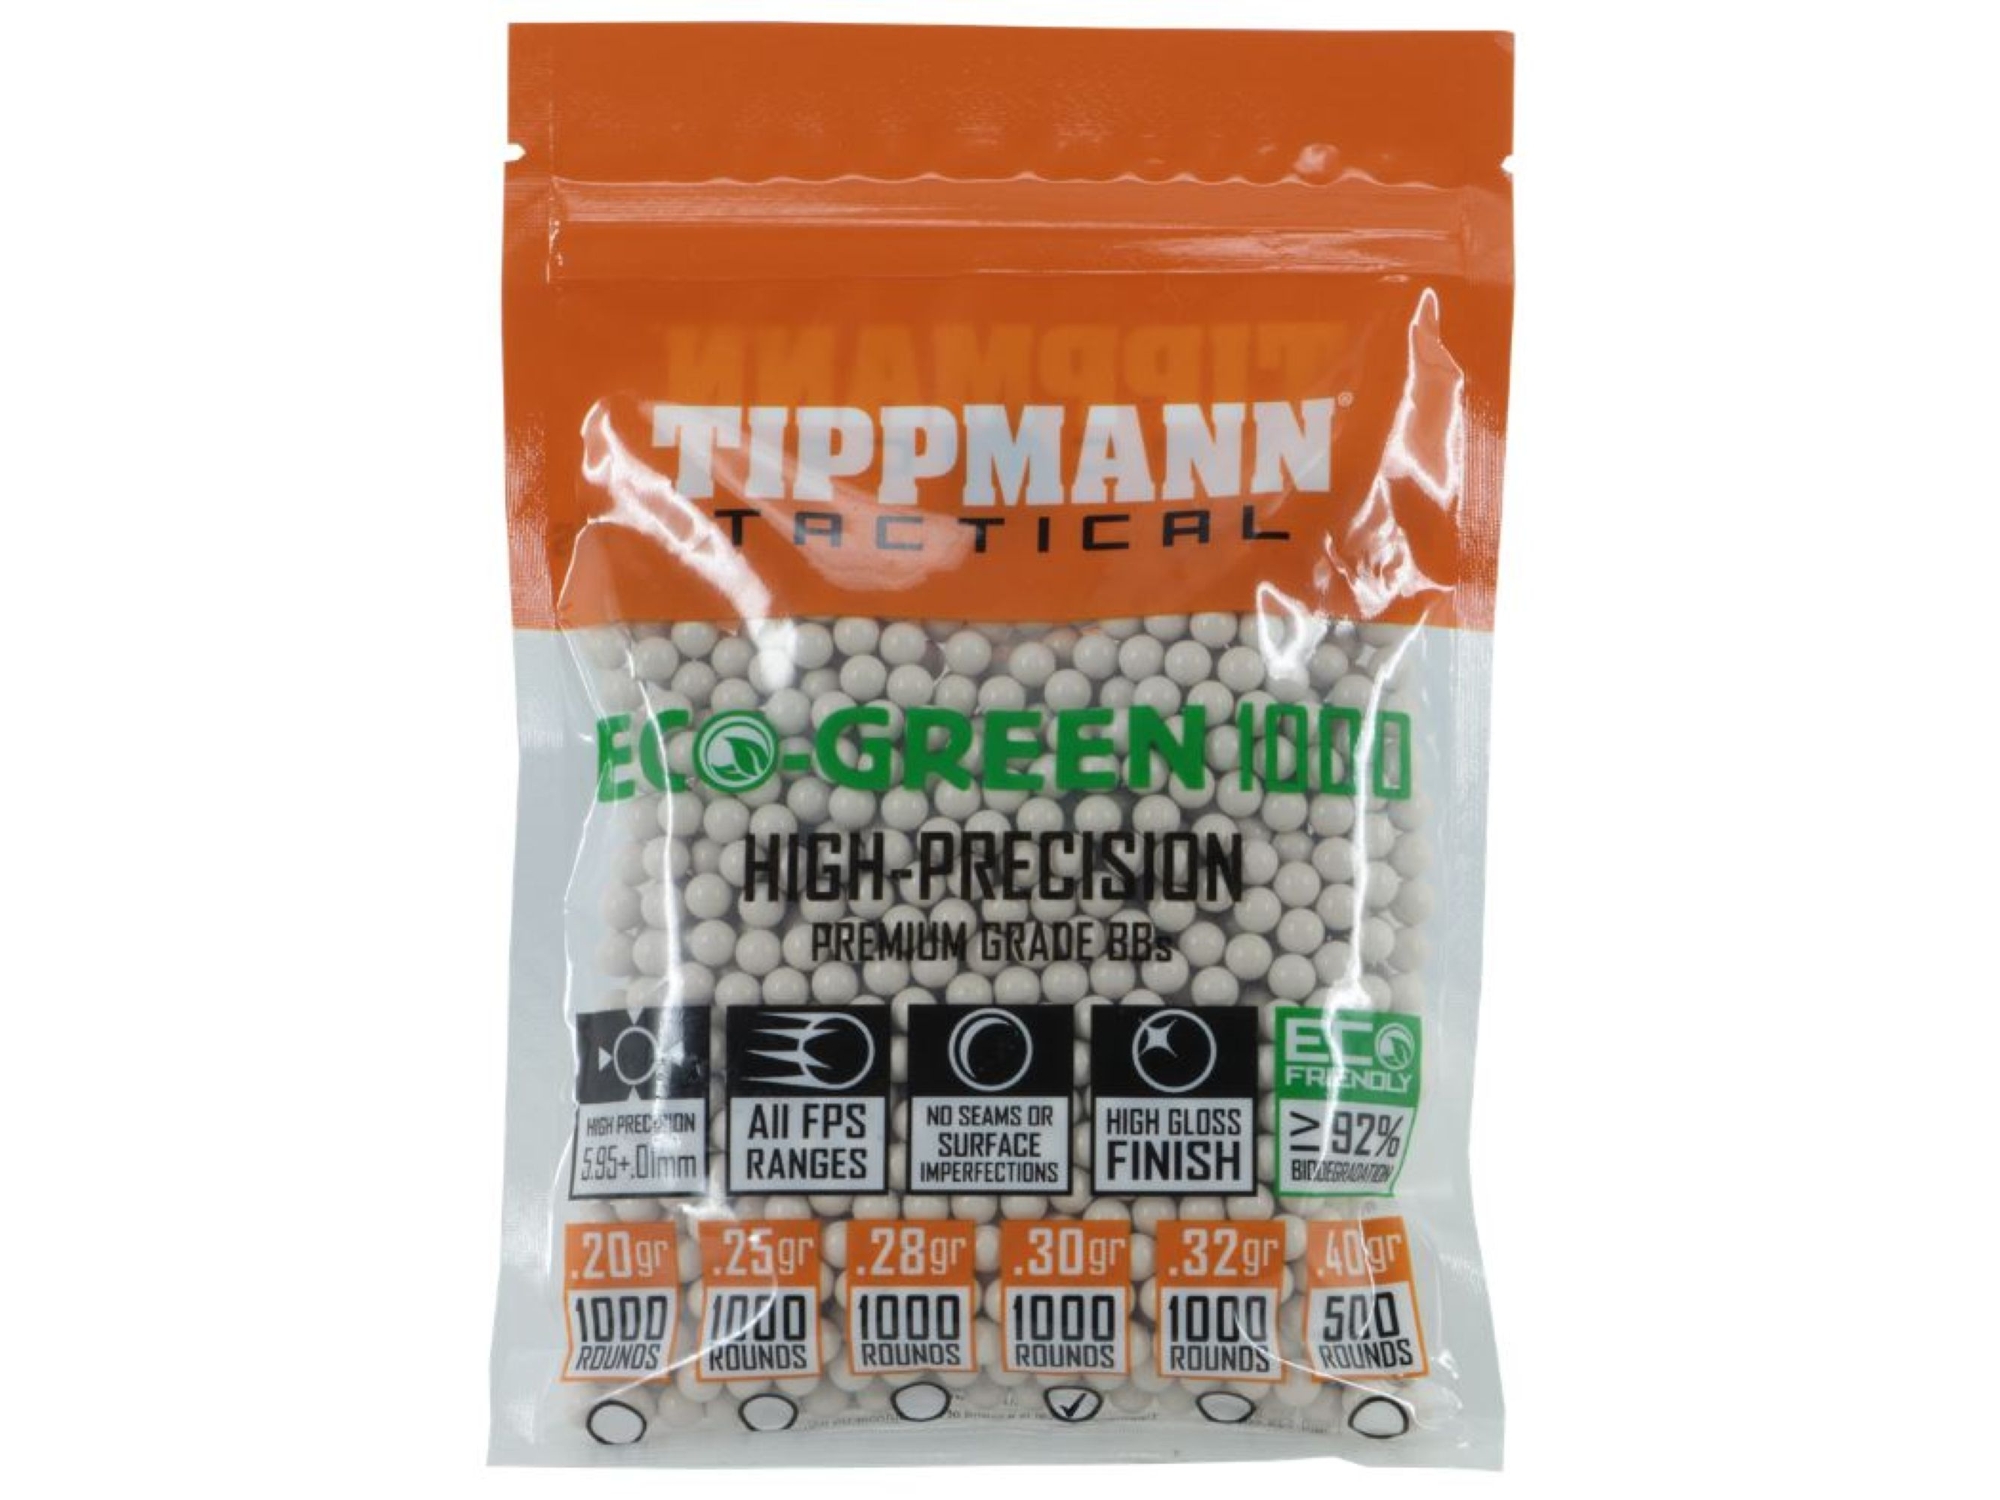 Tippmann Tactical Airsoft BB Eco 1000ct .30g White, 6mm, 1000 count